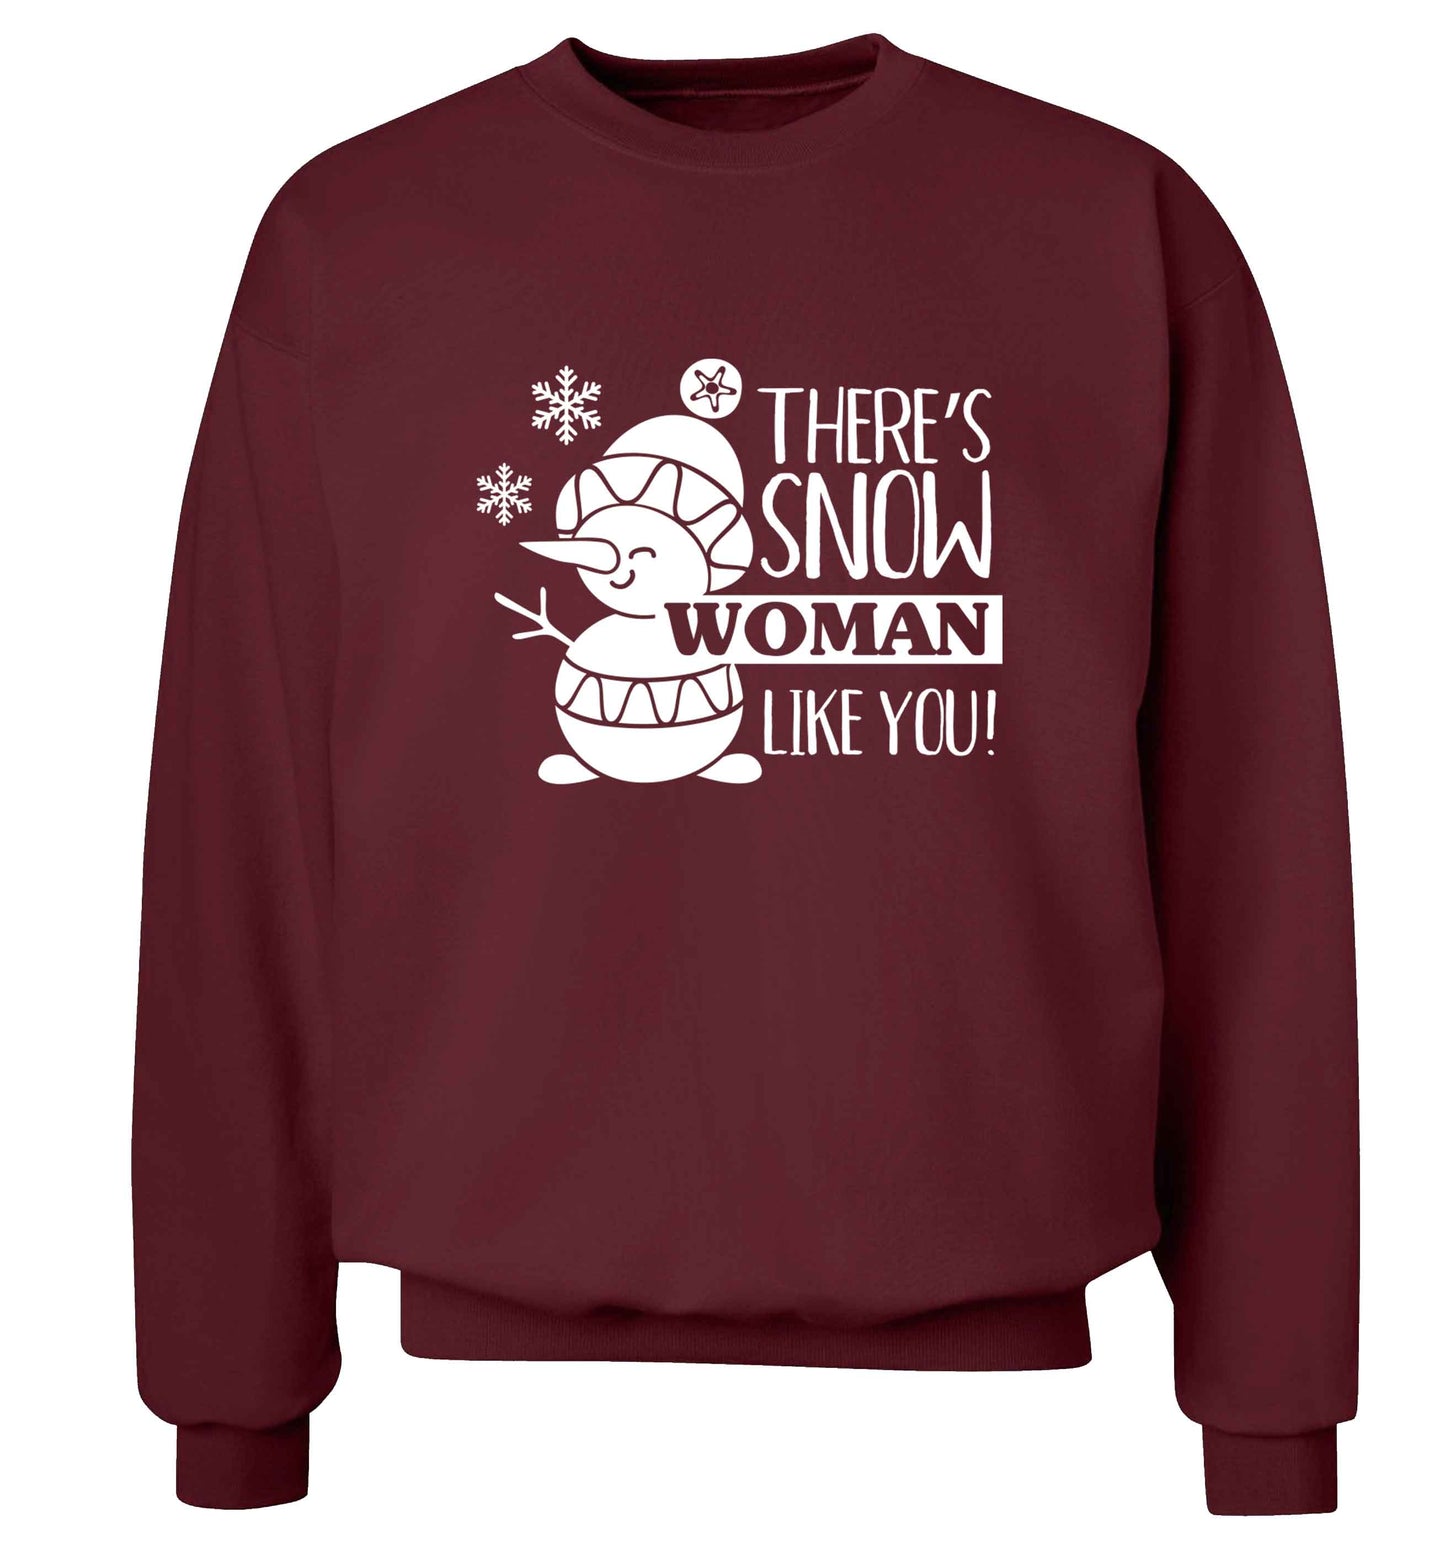 There's snow woman like you adult's unisex maroon sweater 2XL